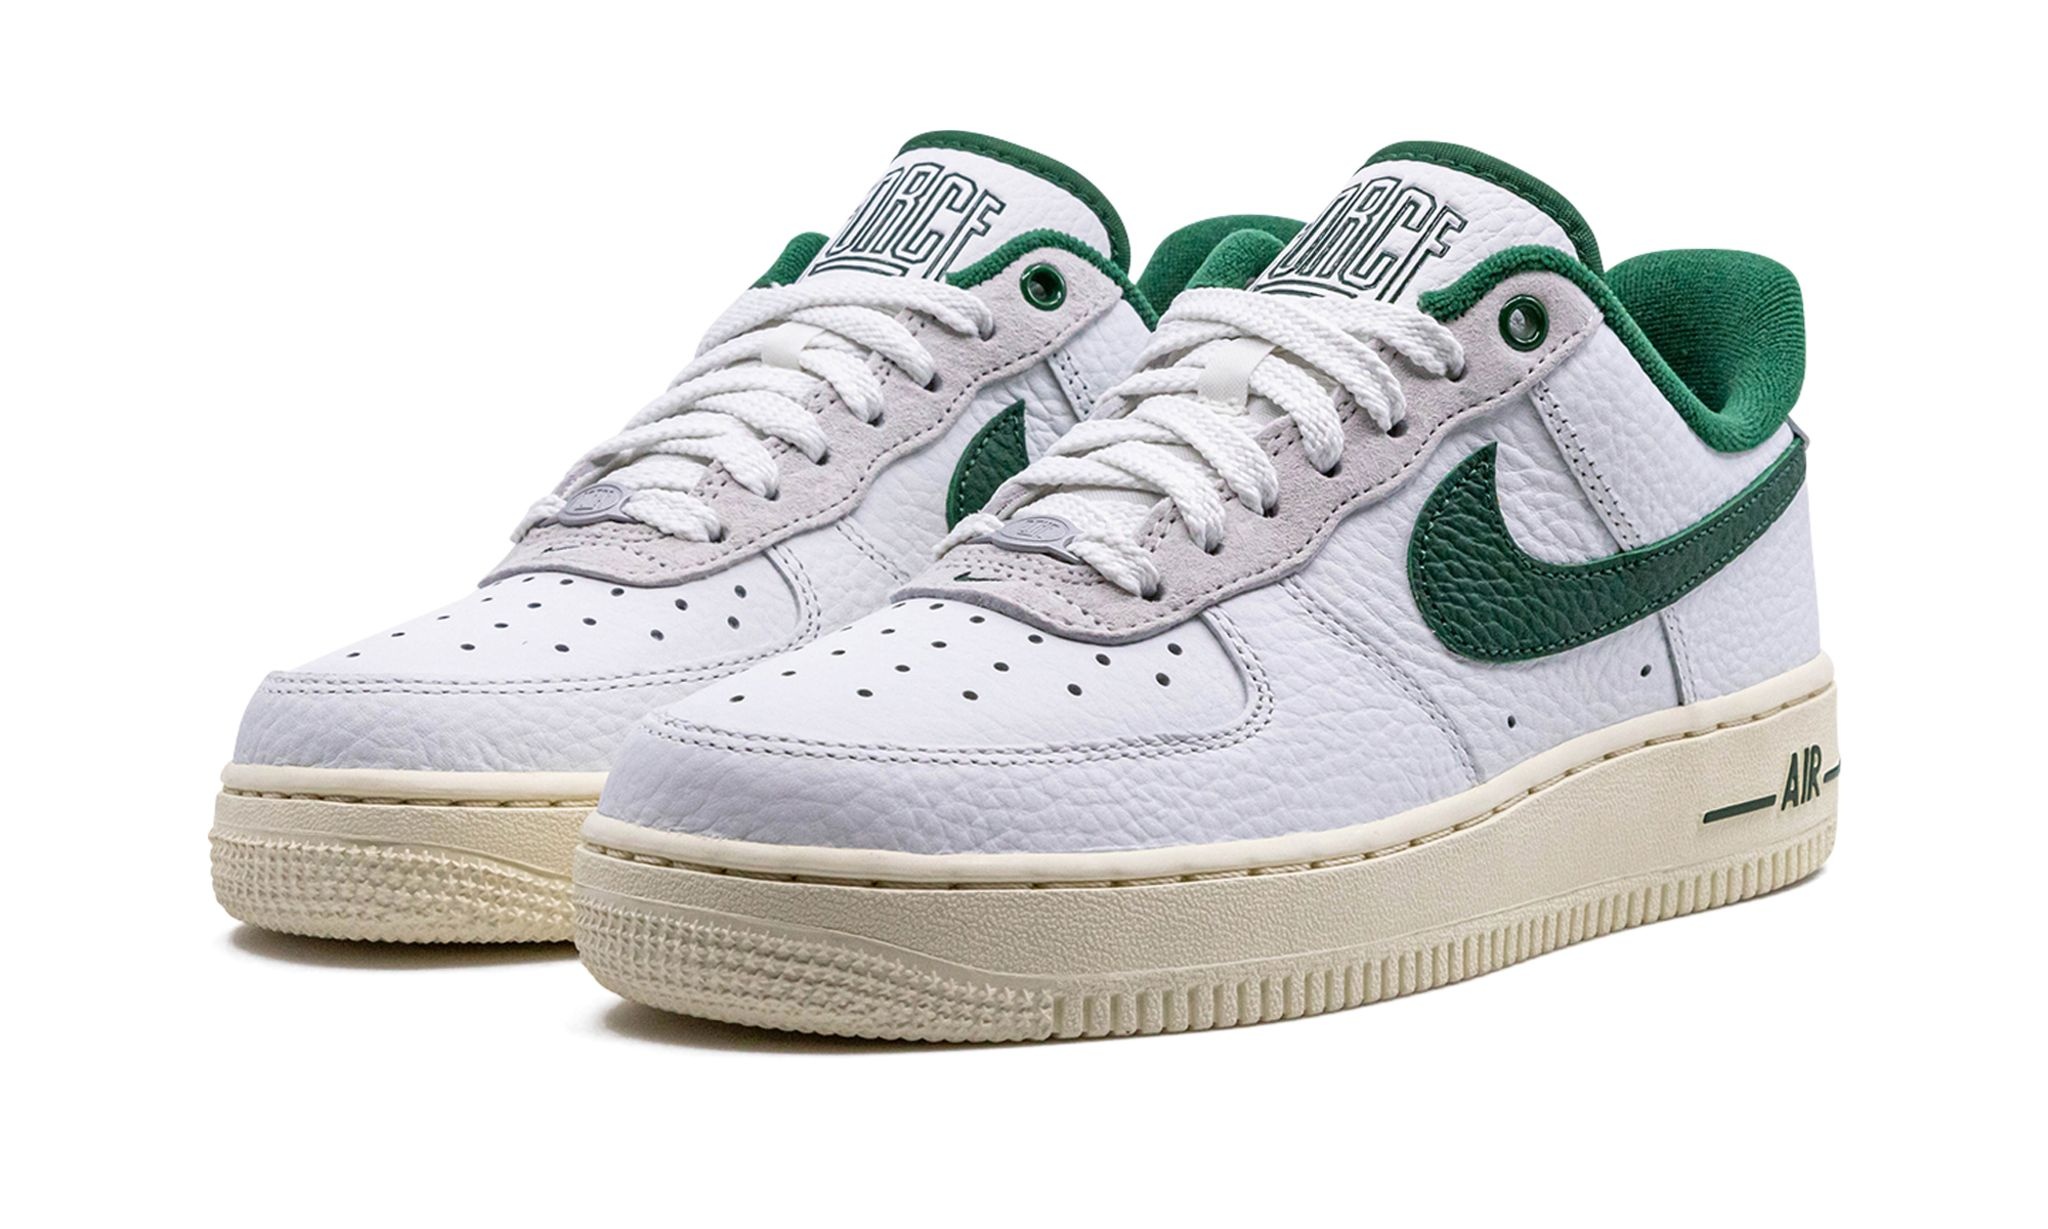 Nike Air Force 1 Low '07 LX WMNS "Command Force Gorge Green" - 2